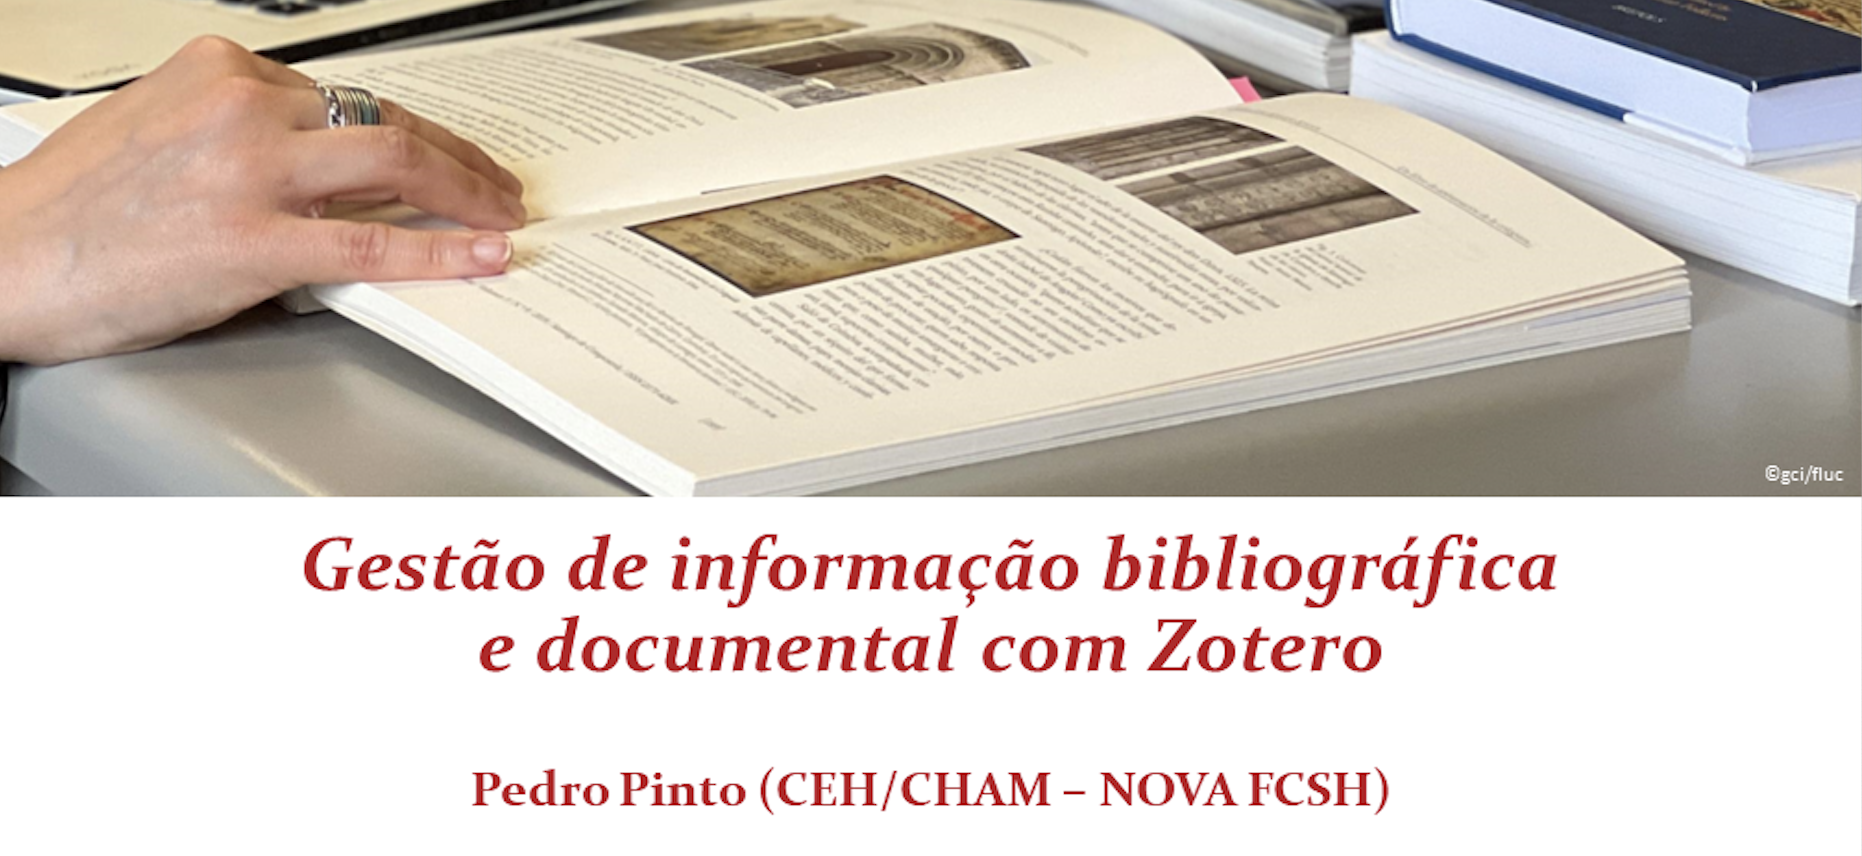 Bibliographic and documental information management with Zotero, by Pedro Pinto (CEH/CHAM-NOVA FCSH)